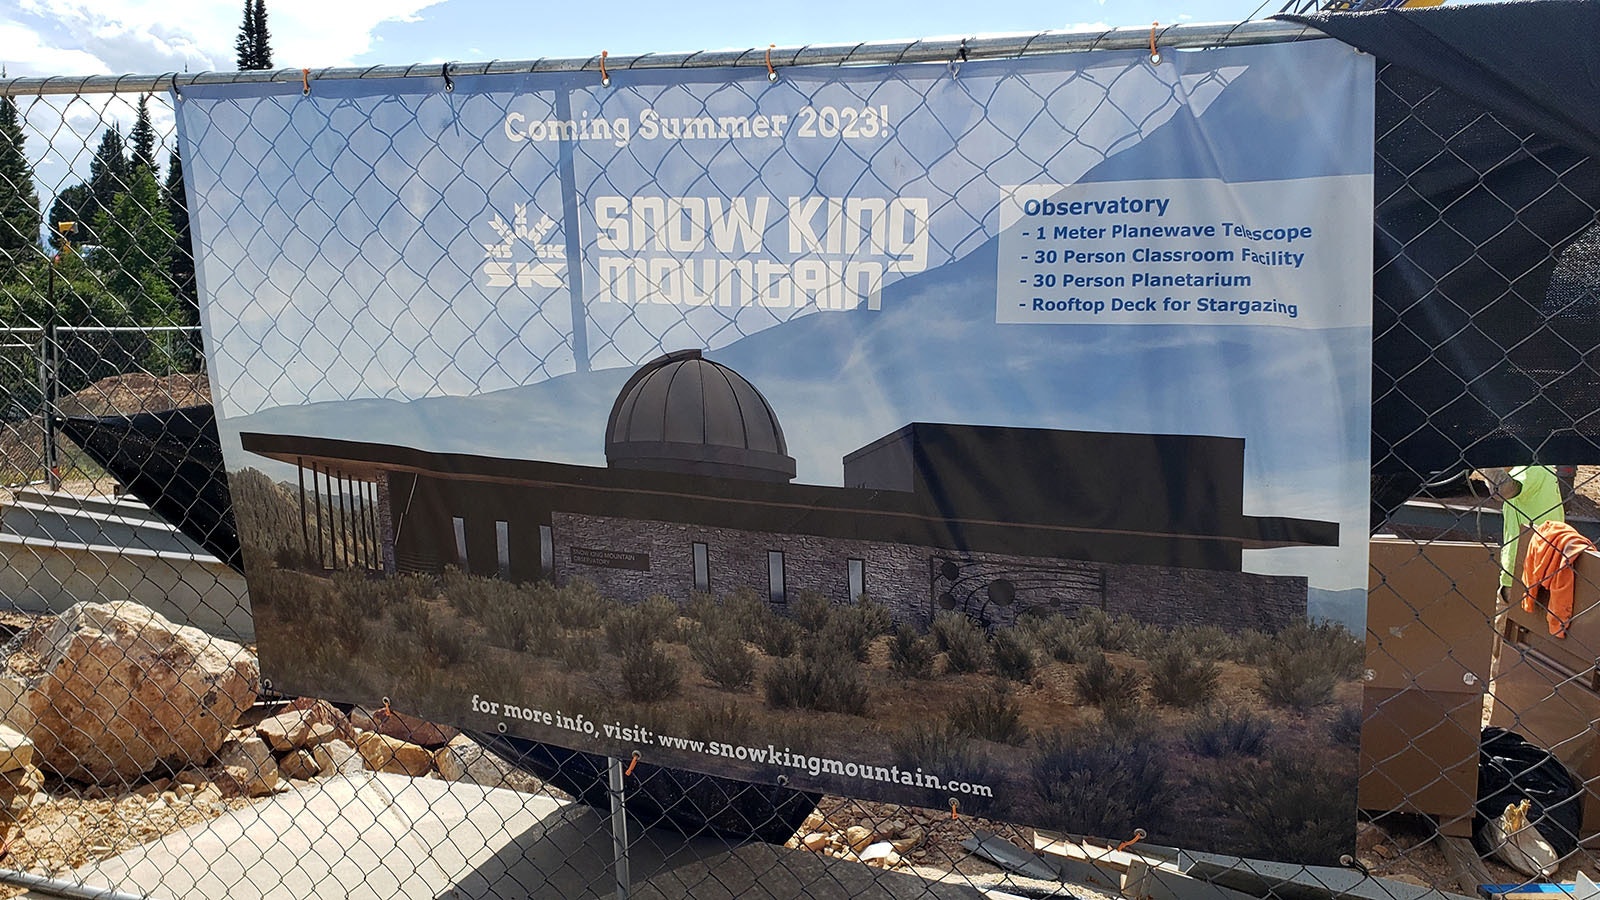 A poster shows what the observatory will look like when complete.